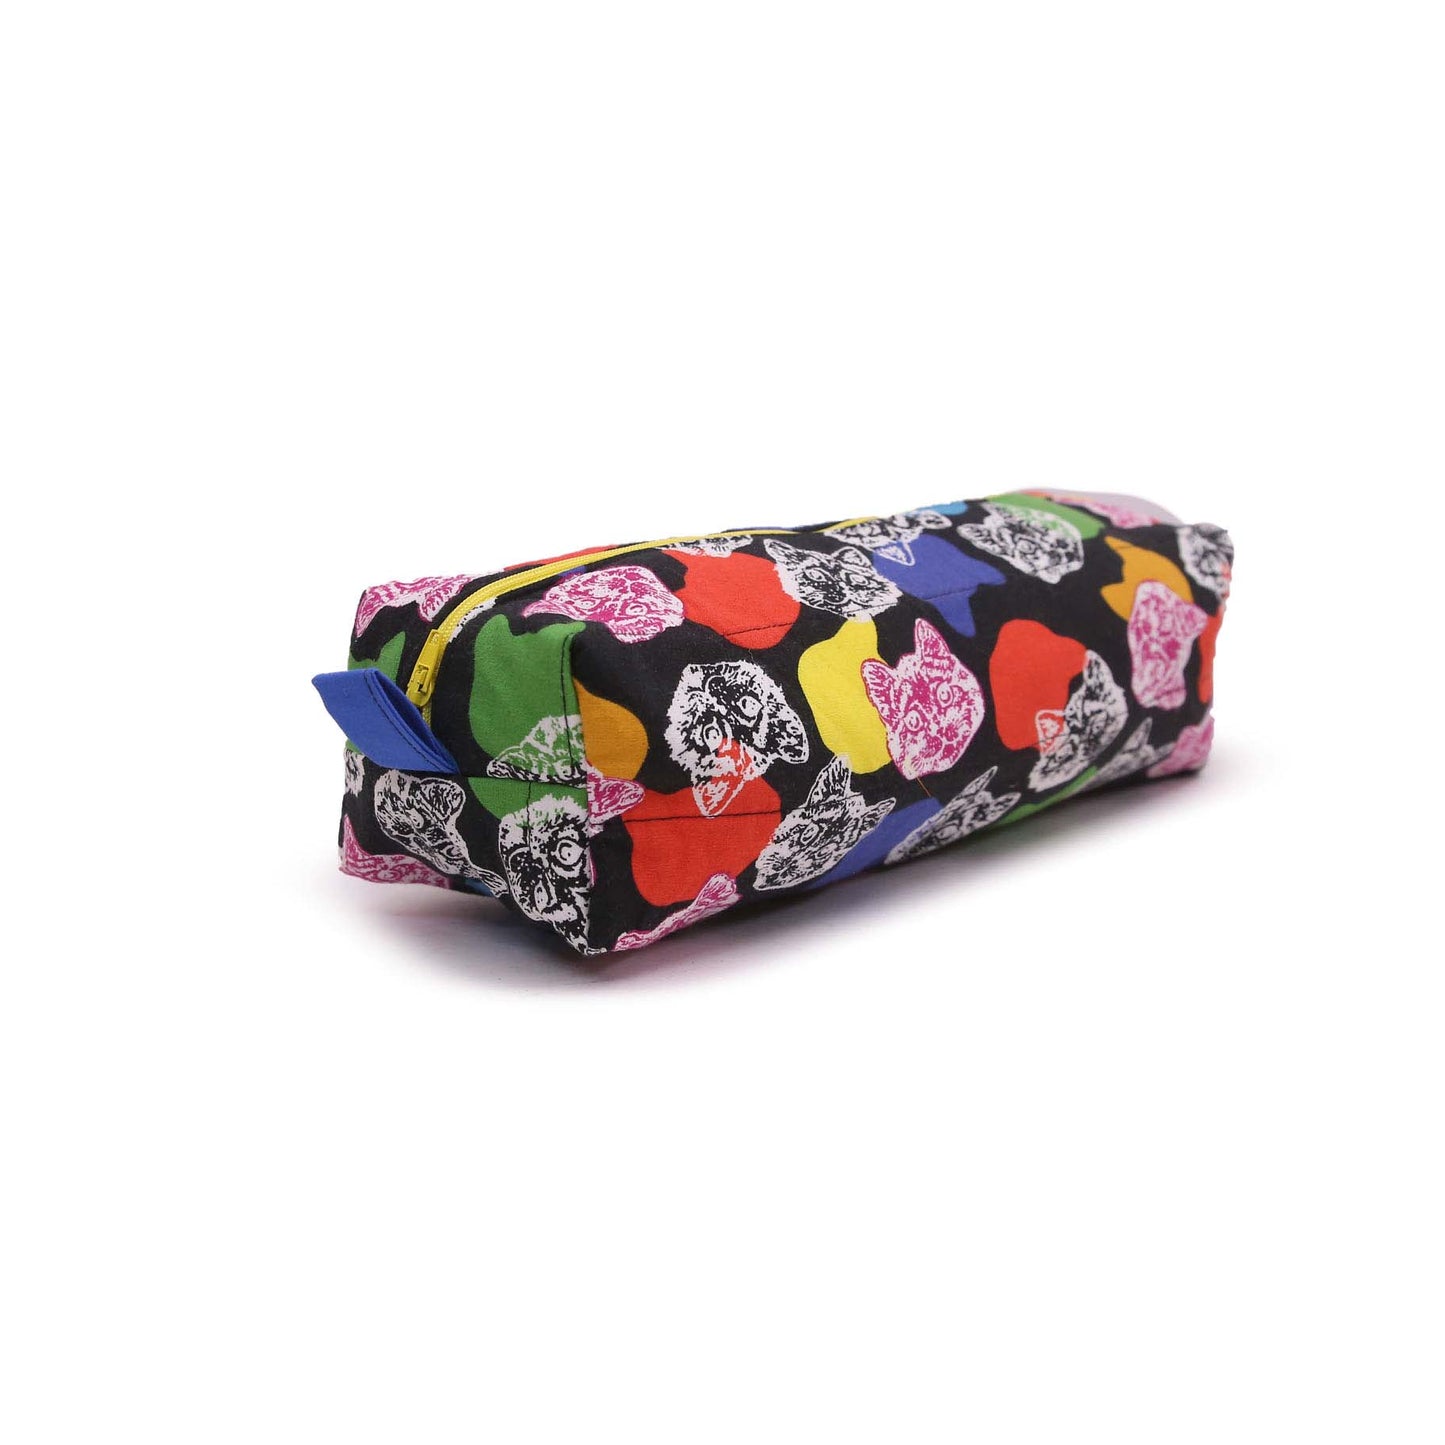 FLOWERED MESHED POUCH